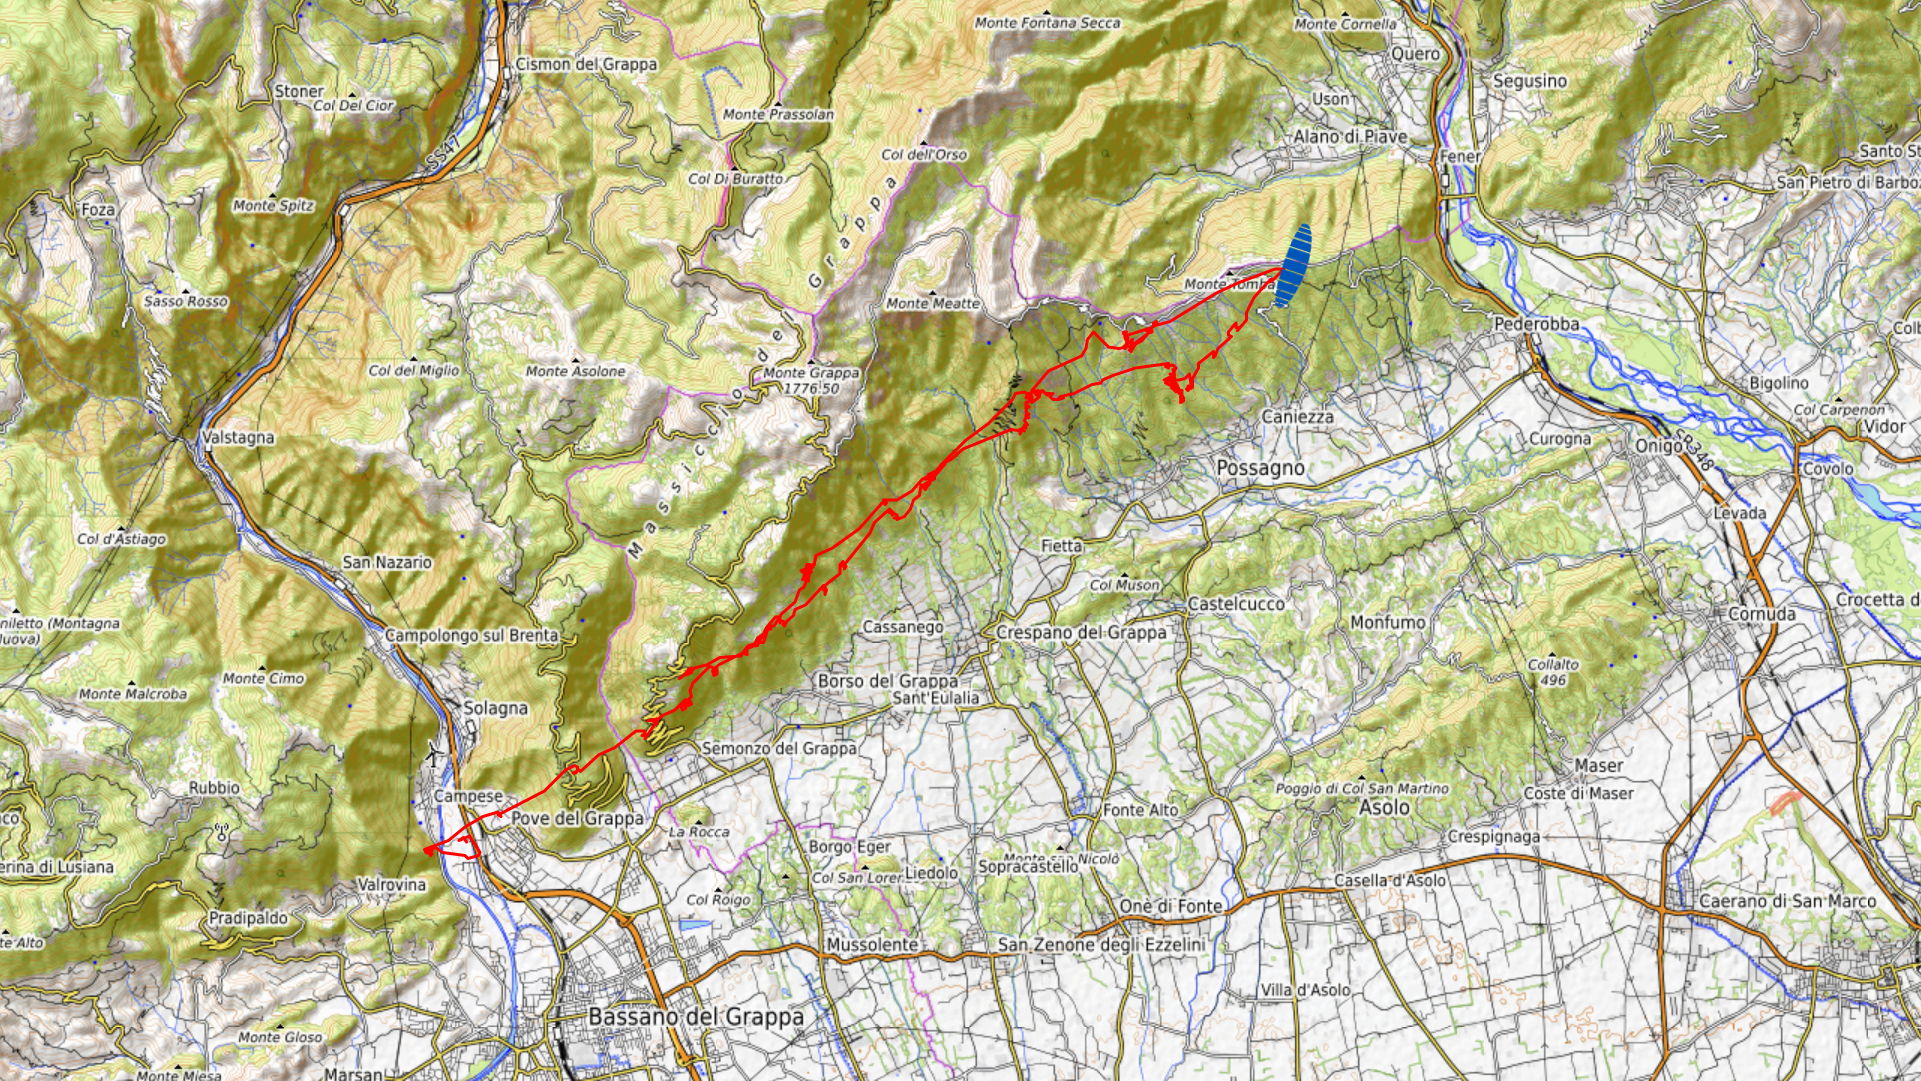 You are currently viewing Paragliding on Mount Grappa, Italia on 17.04.2022